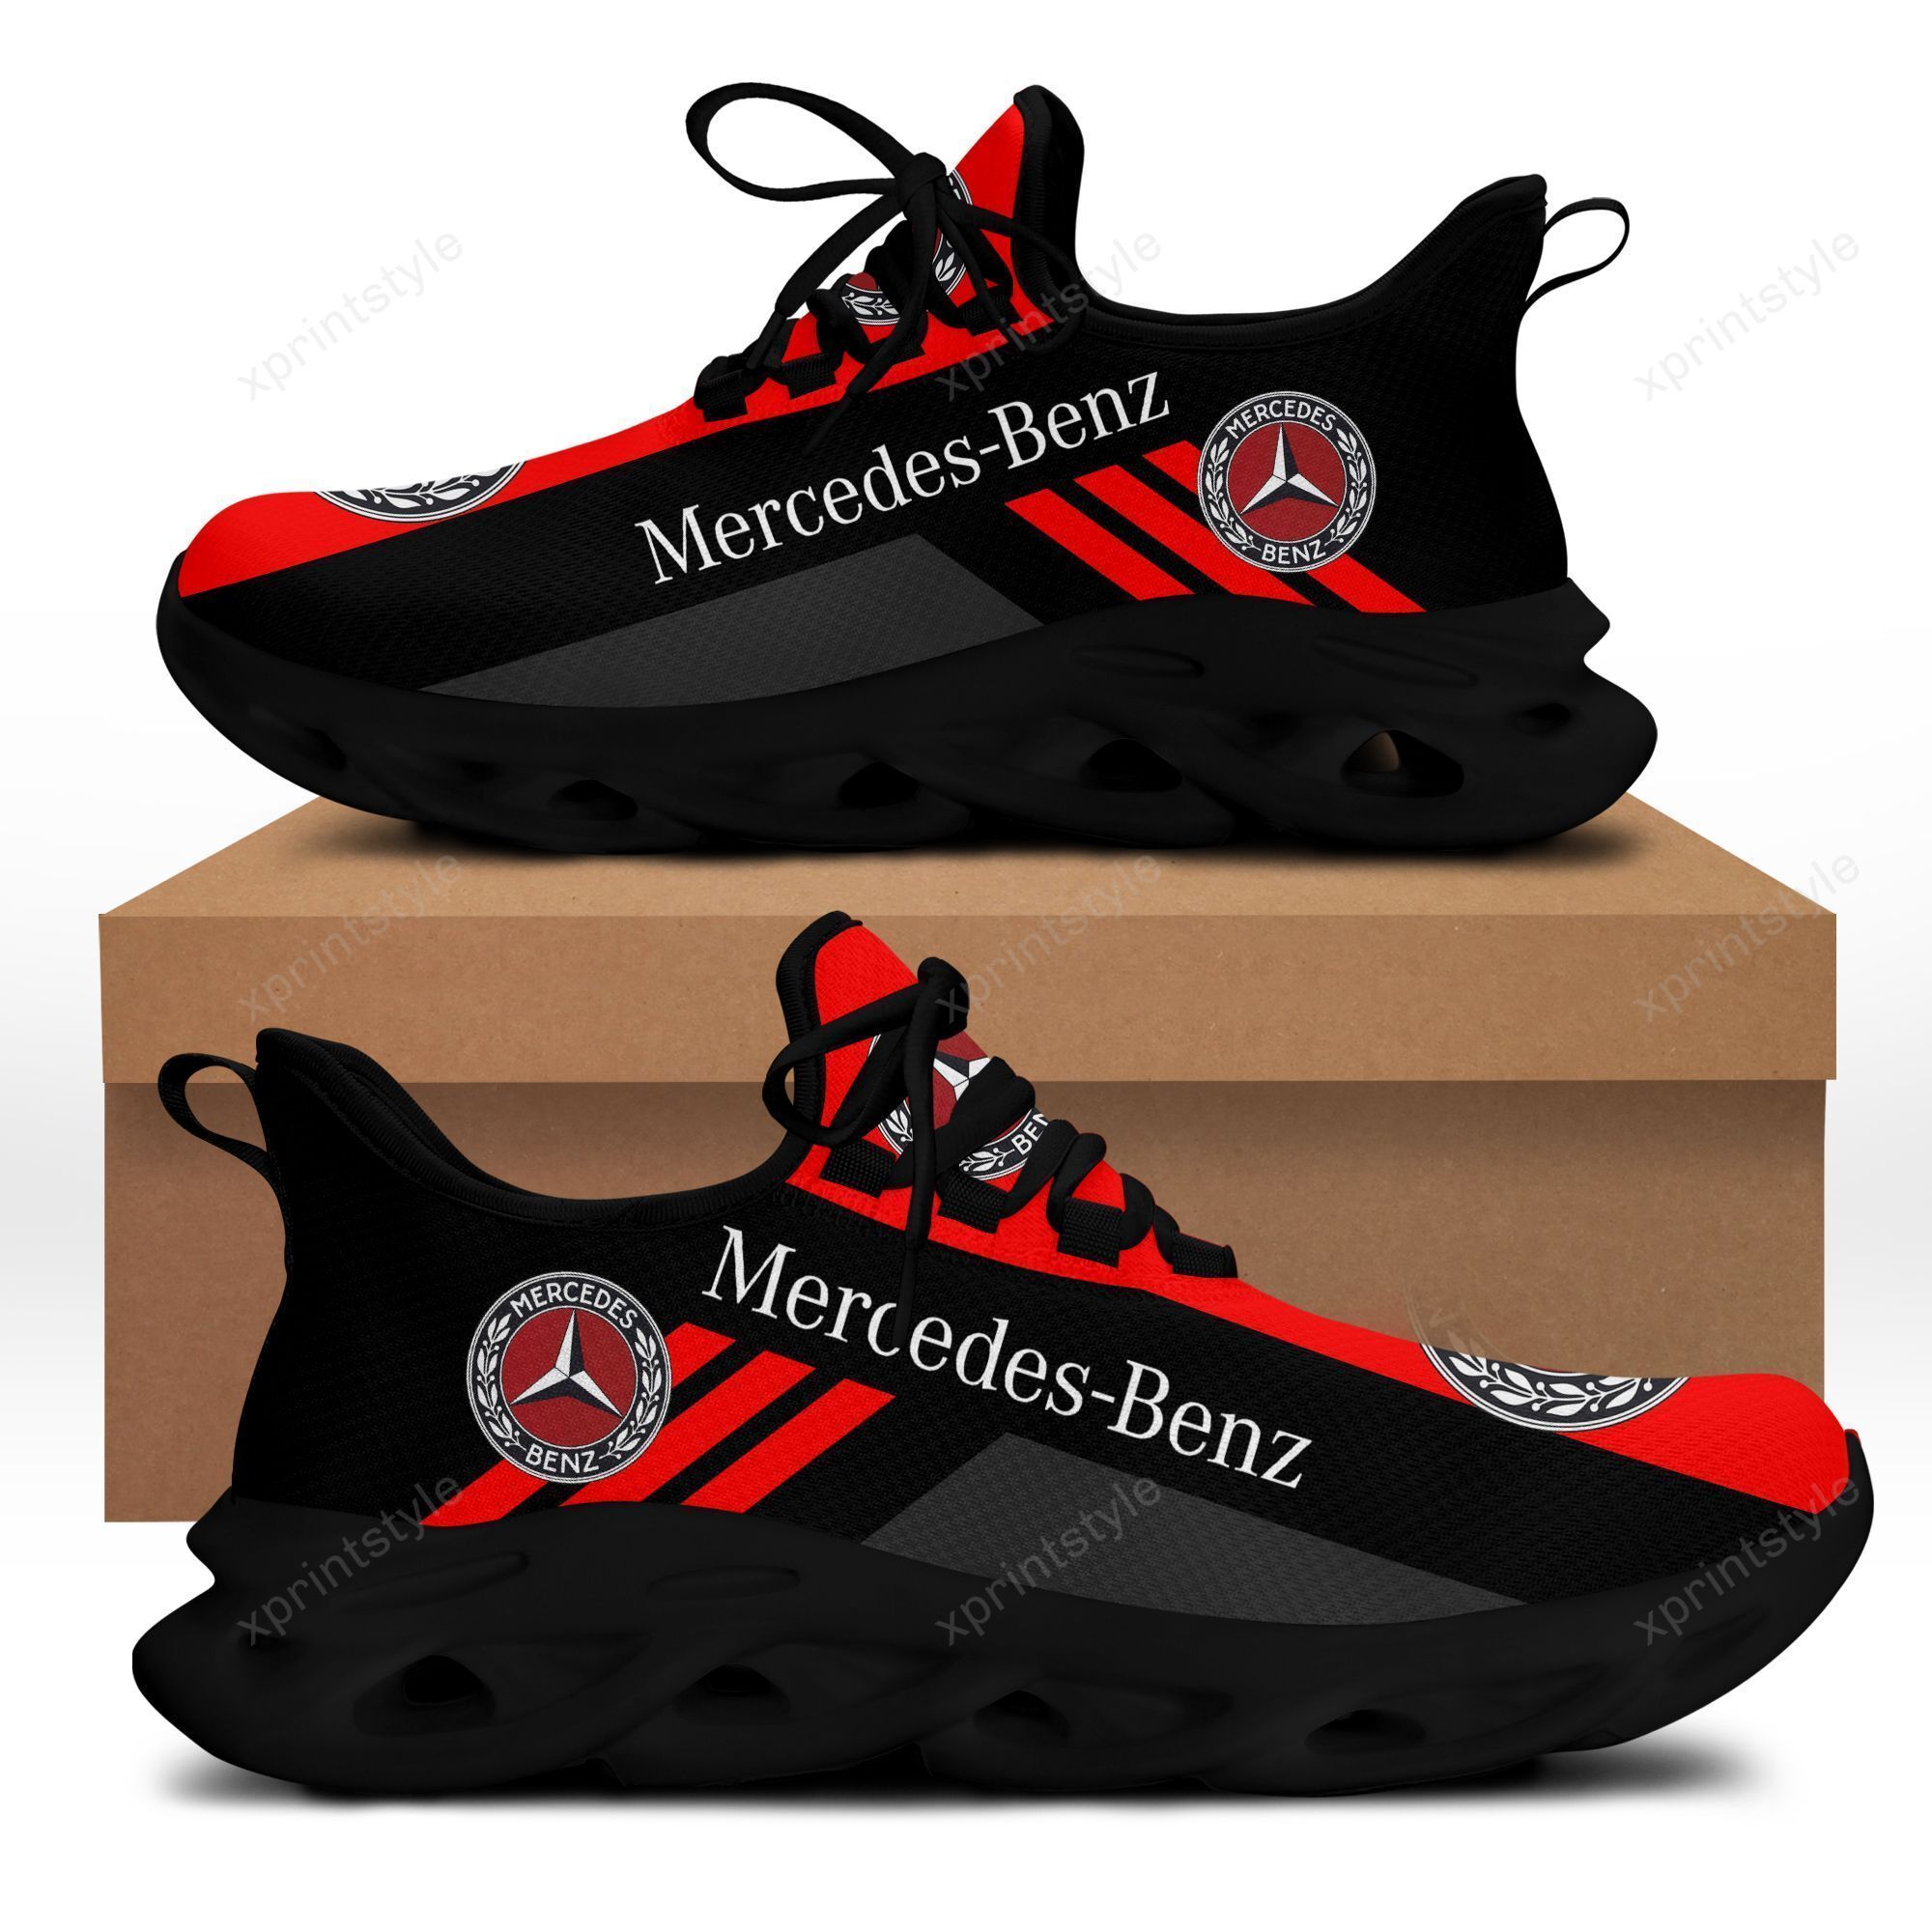 MERCEDES-BENZ AMG RUNNING SHOES VER 1 – Fashionspicex Shop